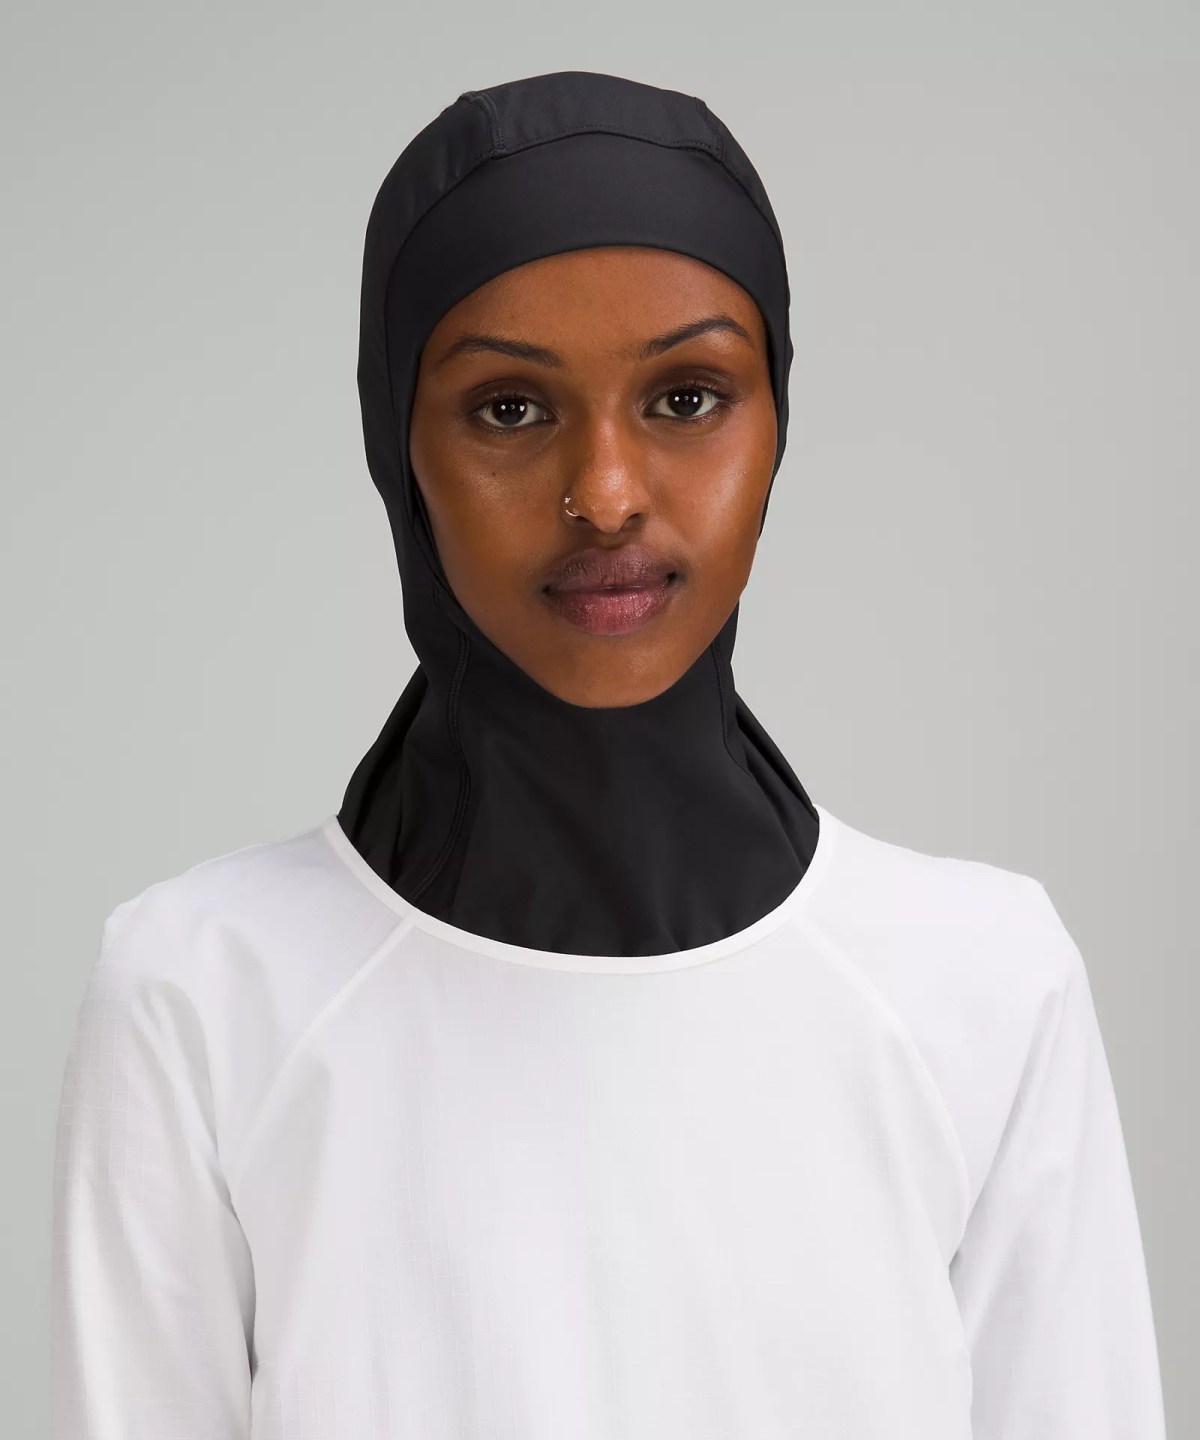 Lululemon launches workout hijabs, netting 5-star reviews from